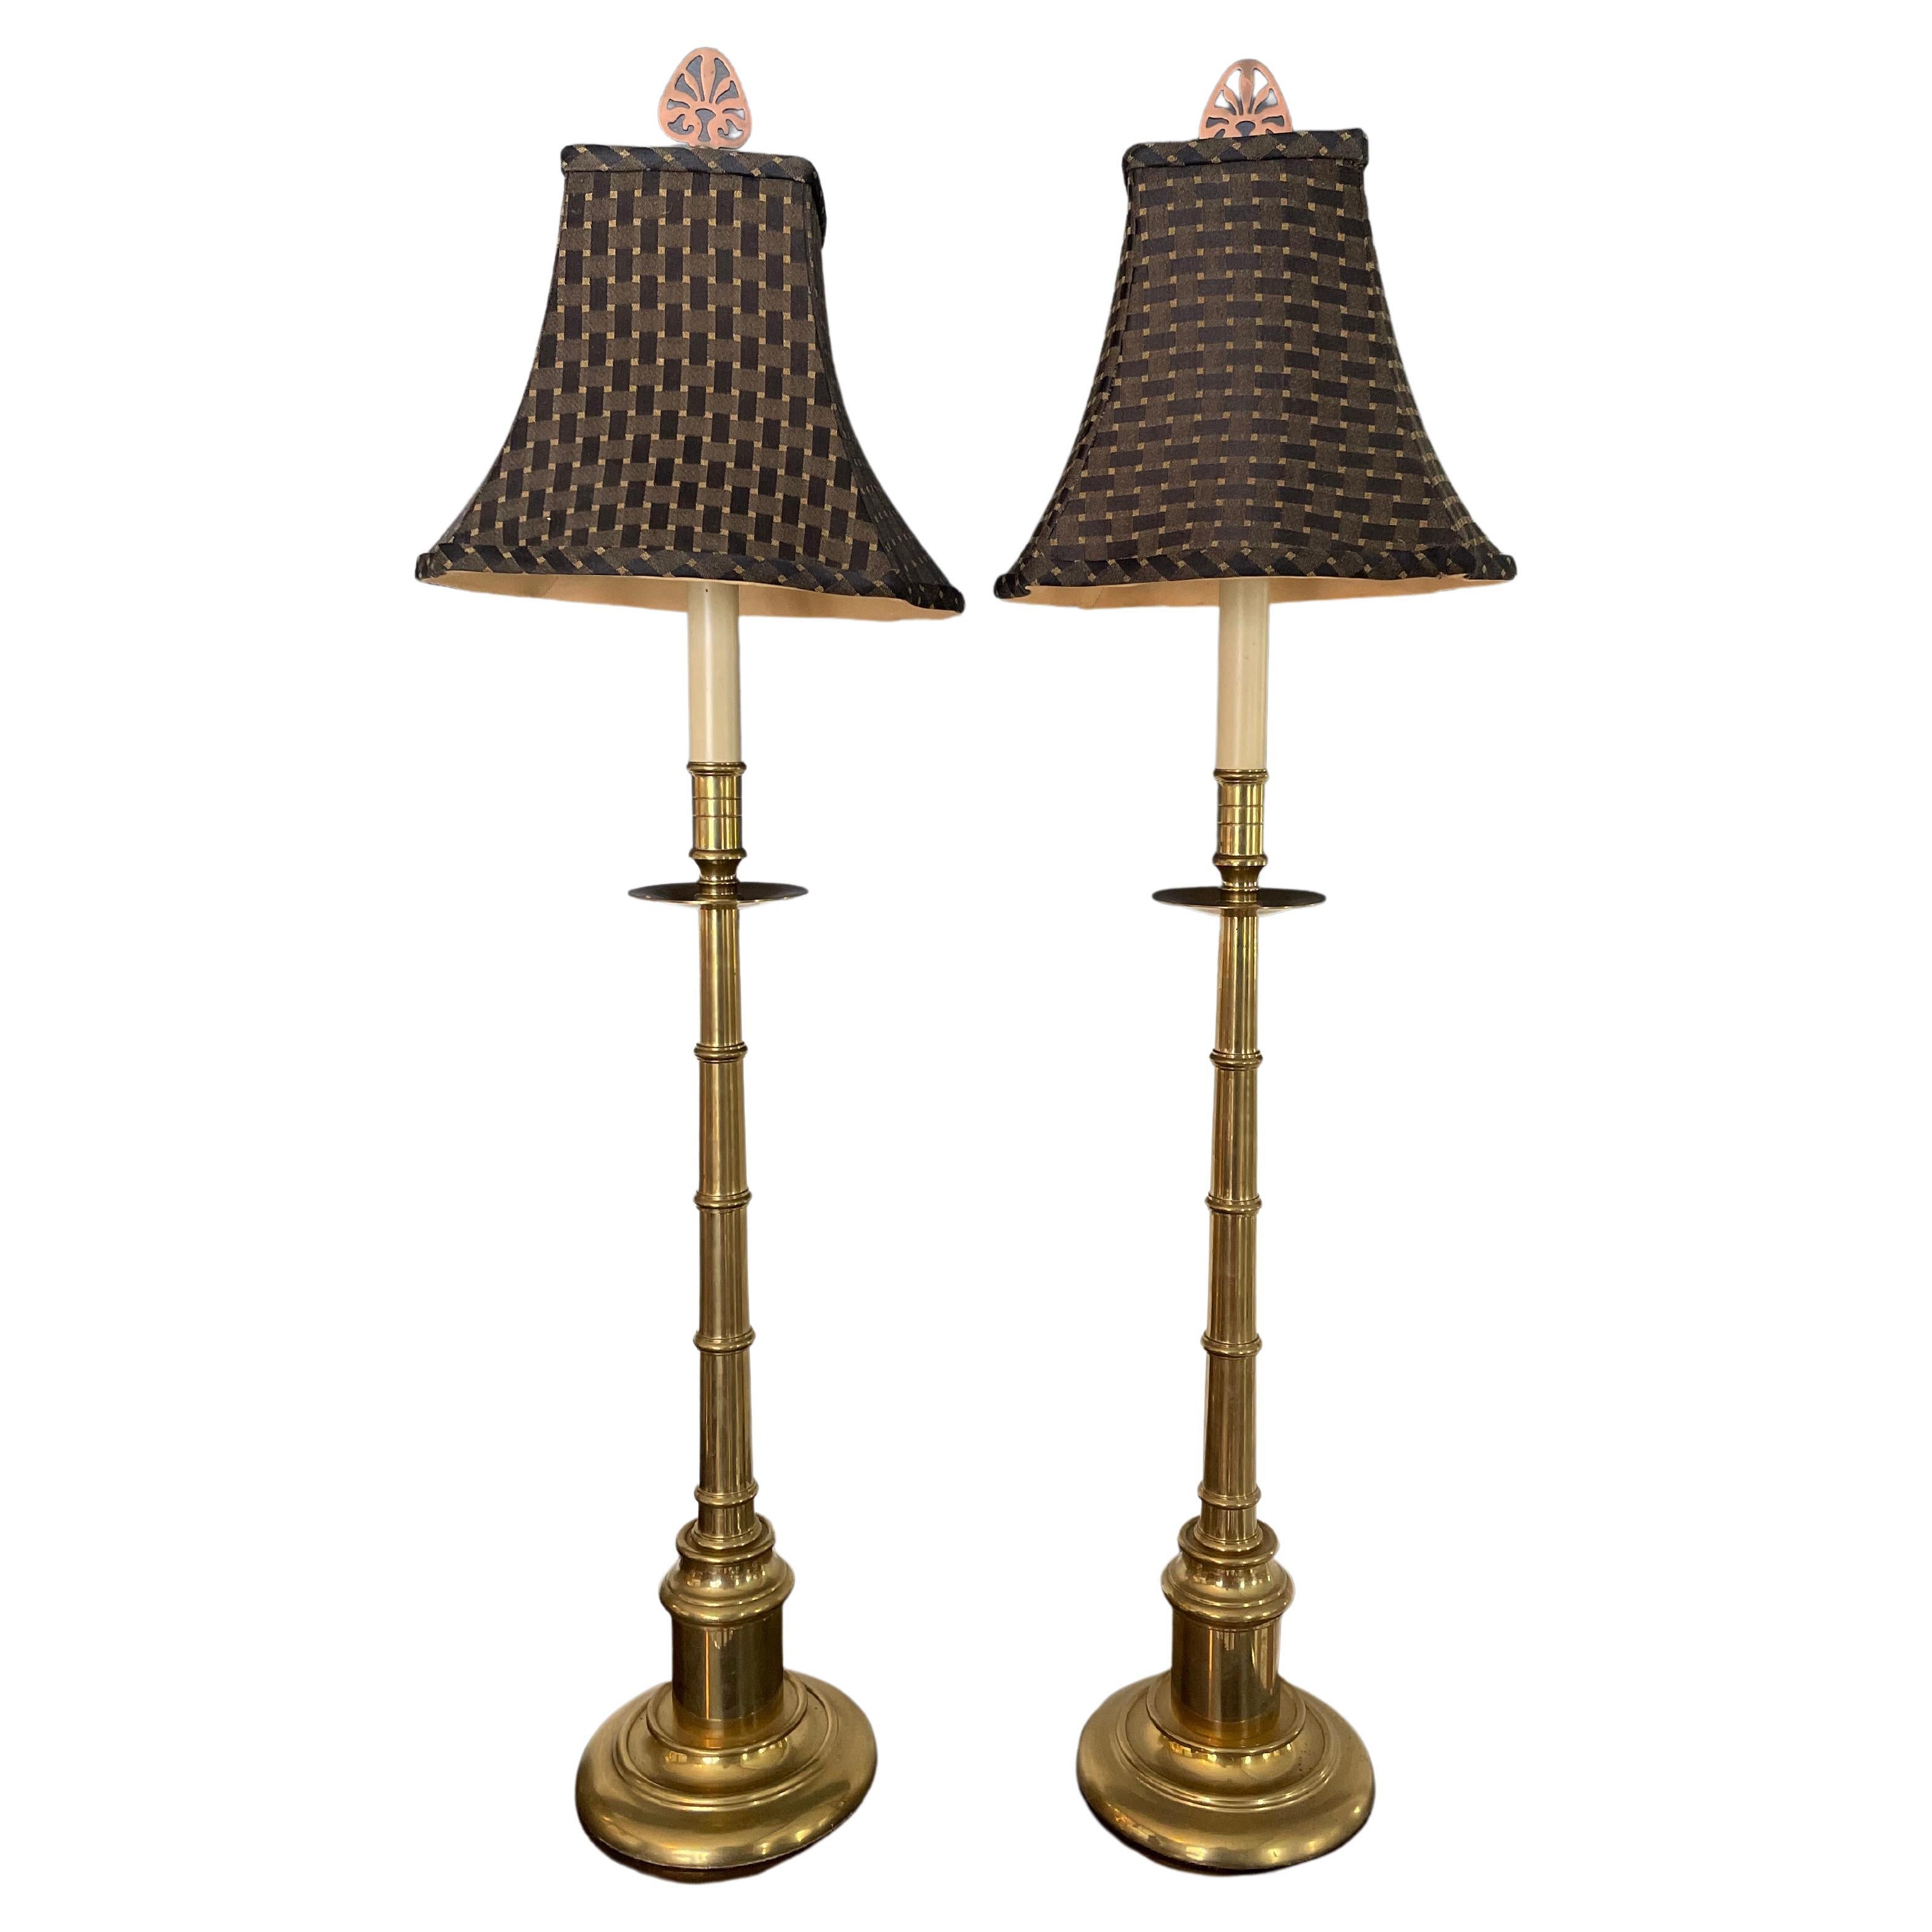 Fantastic example of less is better. Faux bamboo brass candlestick lamps. Quality craftsmanship, heavy! Custom lampshade by Canterbury, Brookly NY.